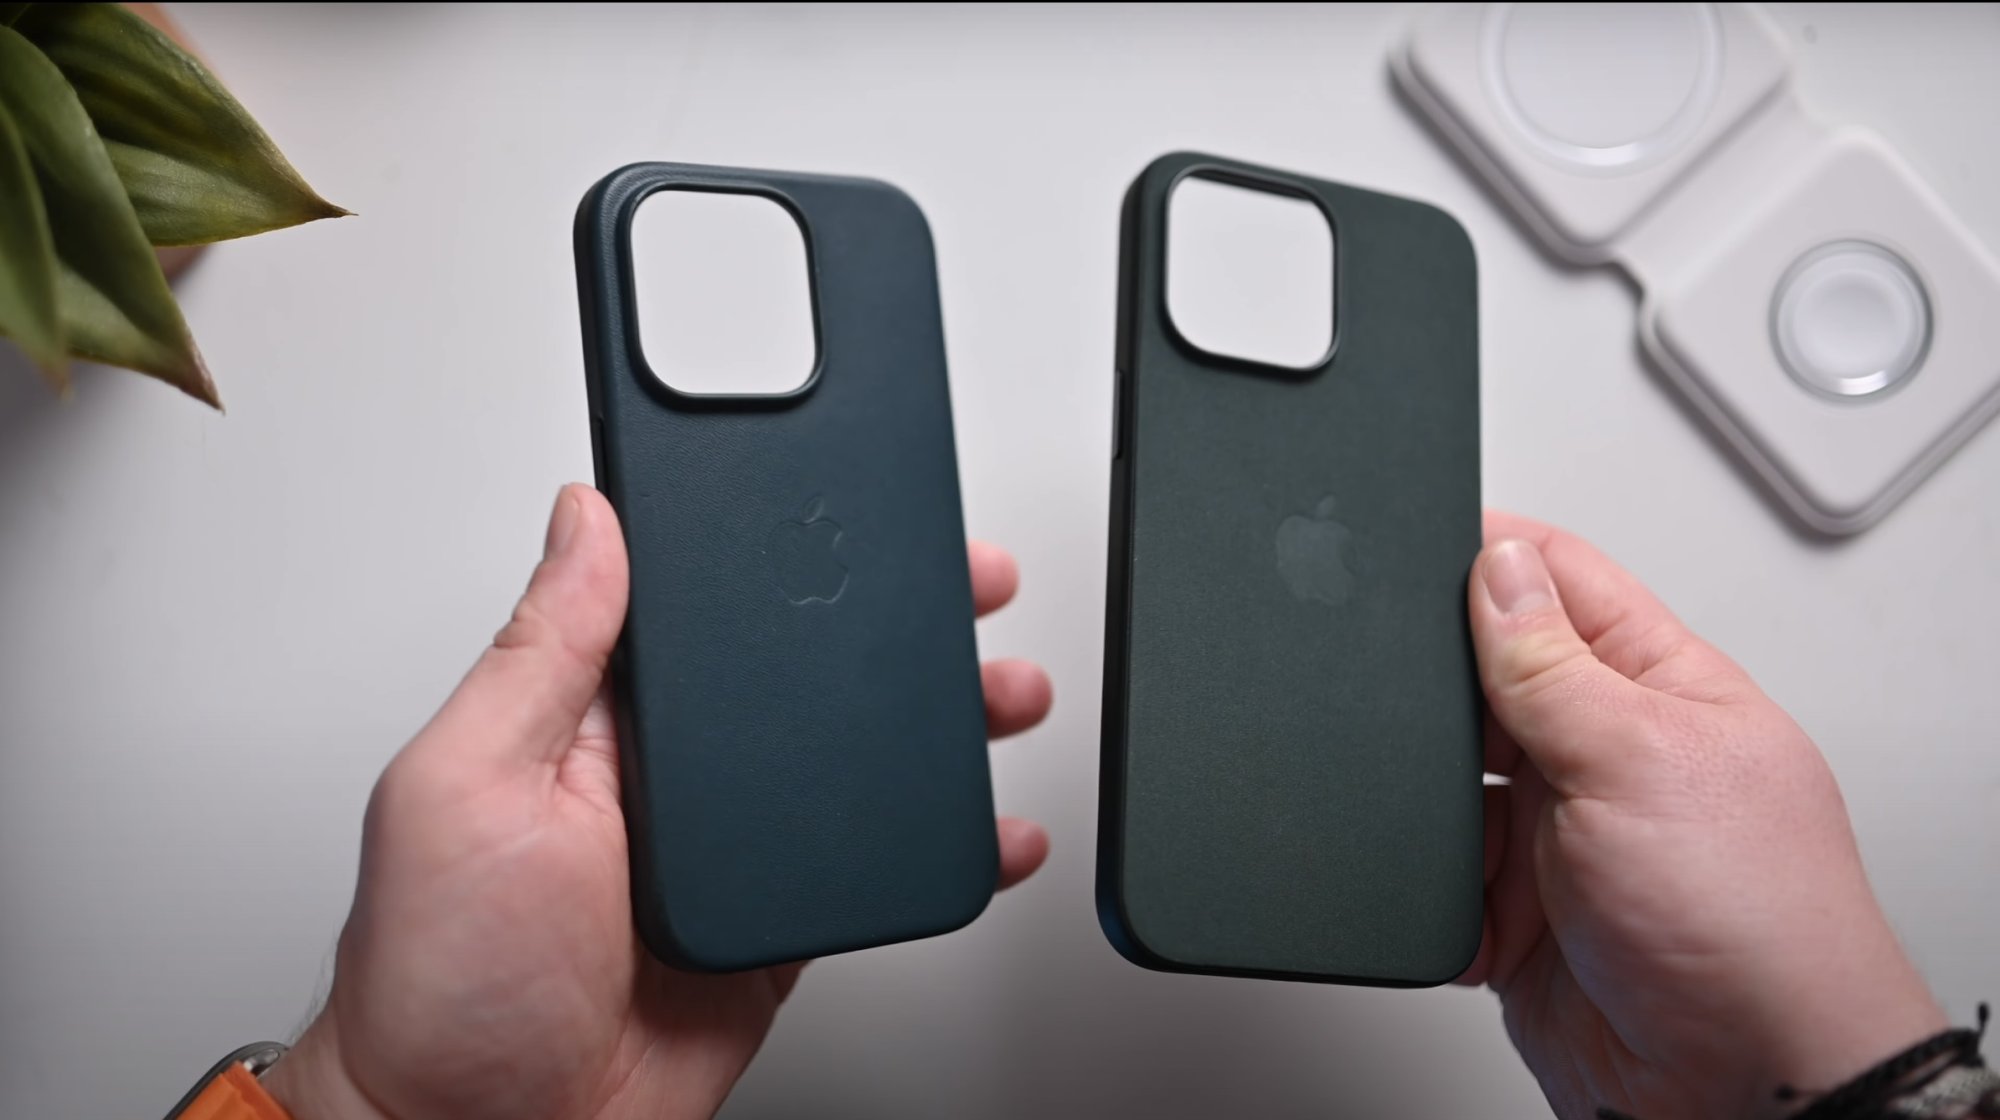 Forget FineWoven: This is a fabric iPhone 15 Pro case done right